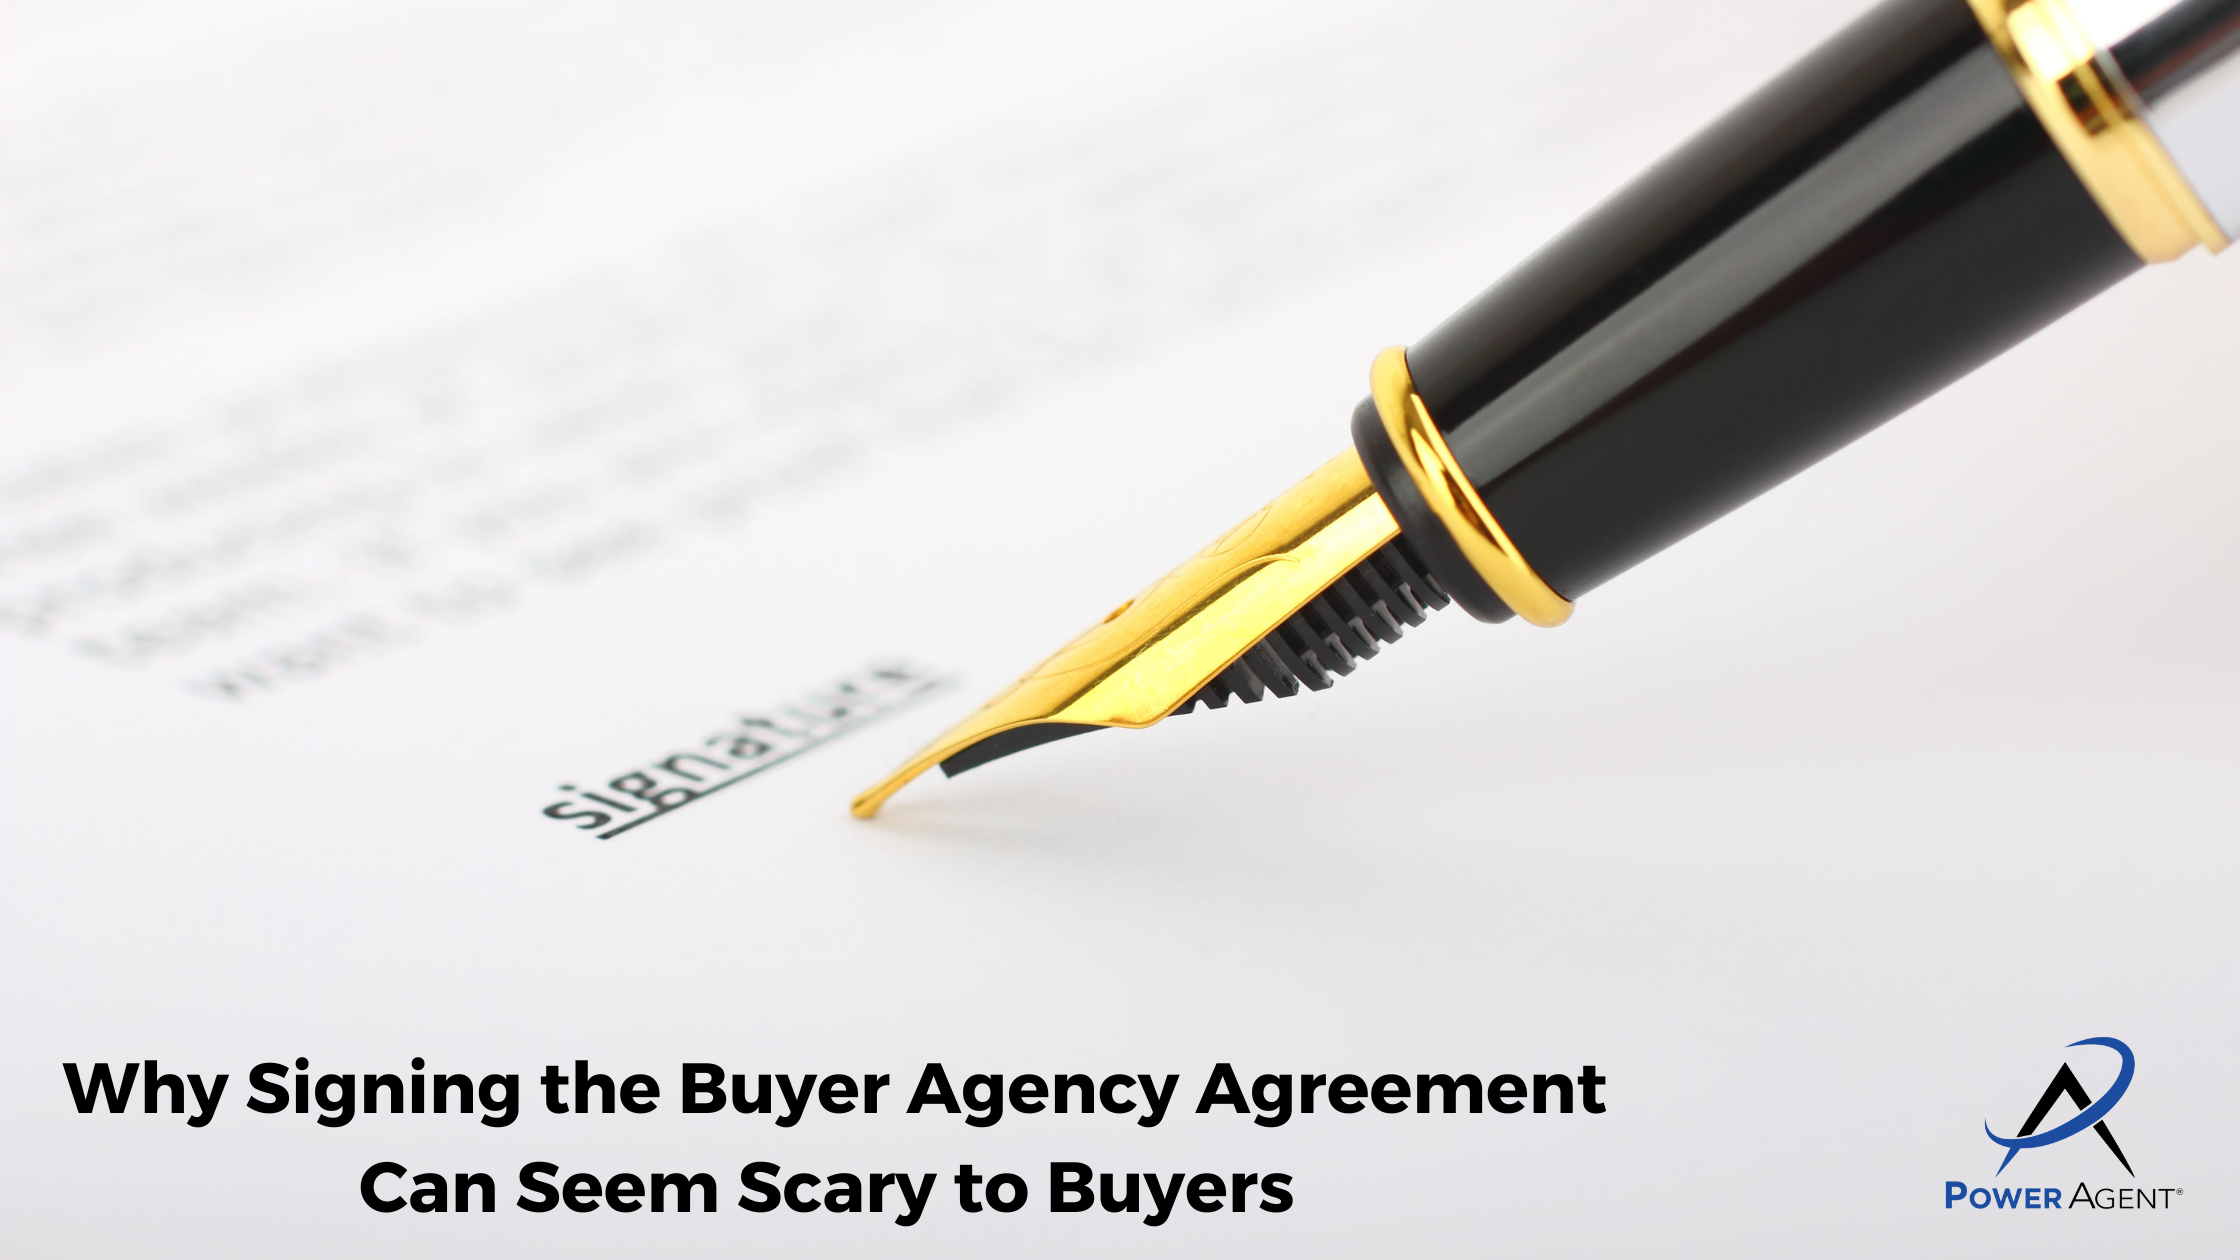 Why Signing the Buyer Agency Agreement Can Seem Scary to Buyers